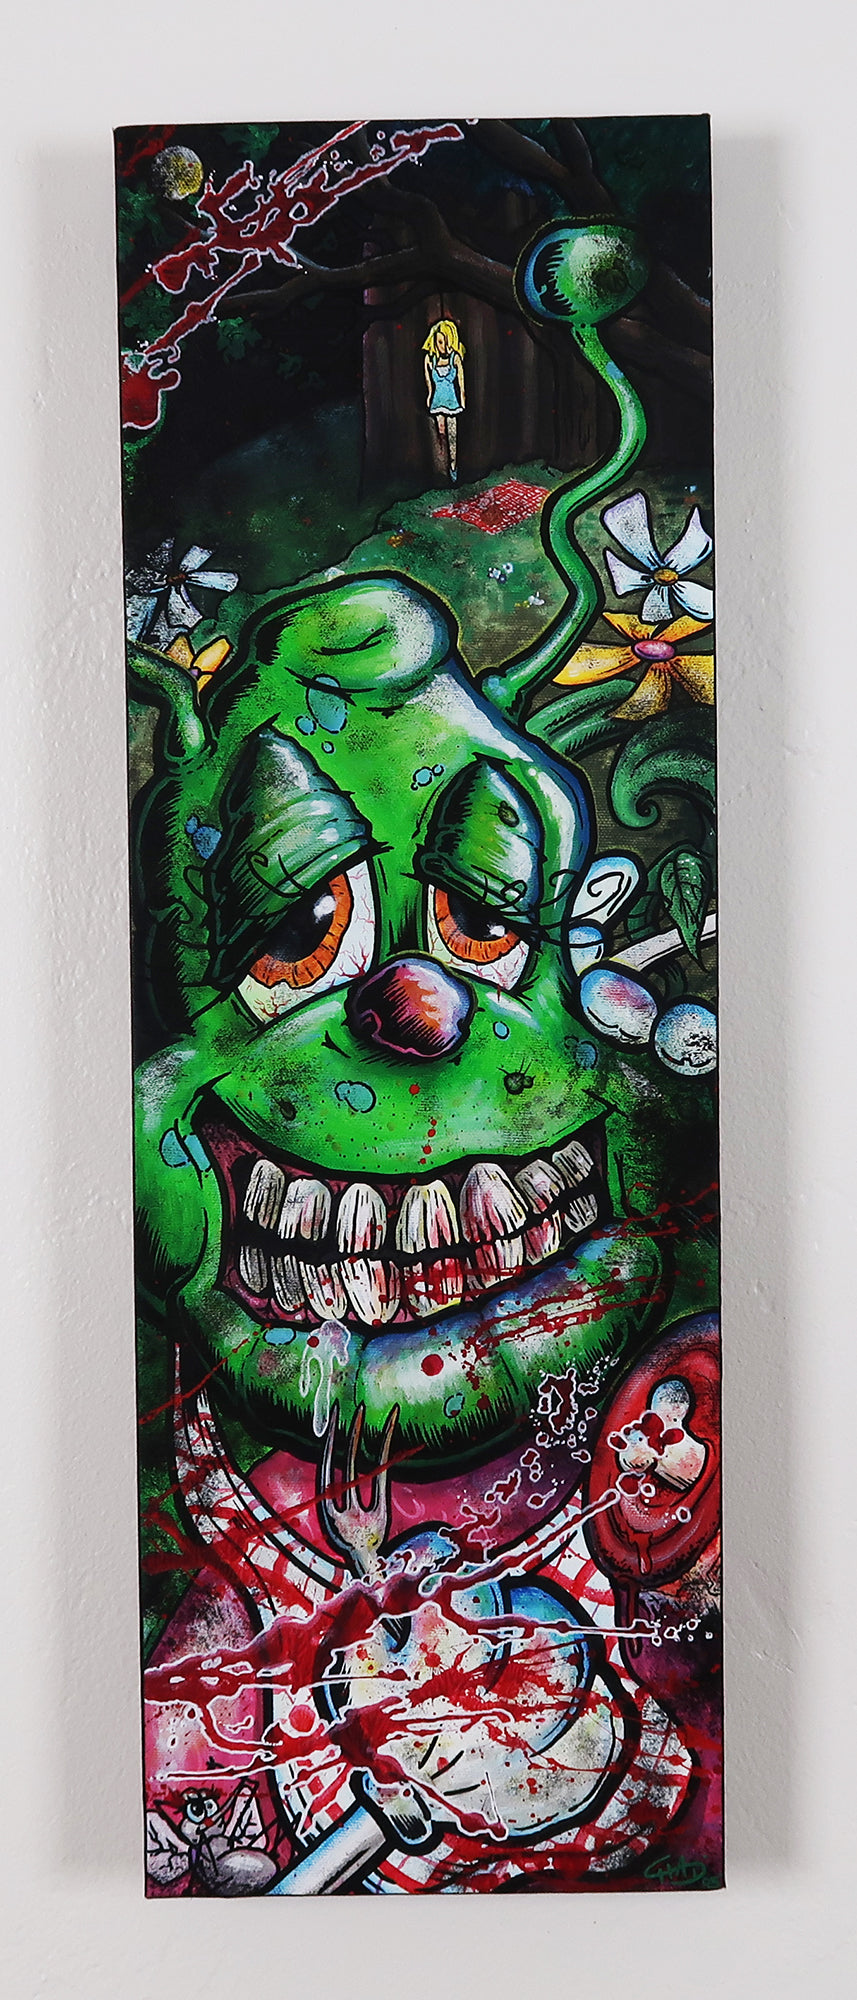 End of Wonderland 8"x24" Canvas Painting